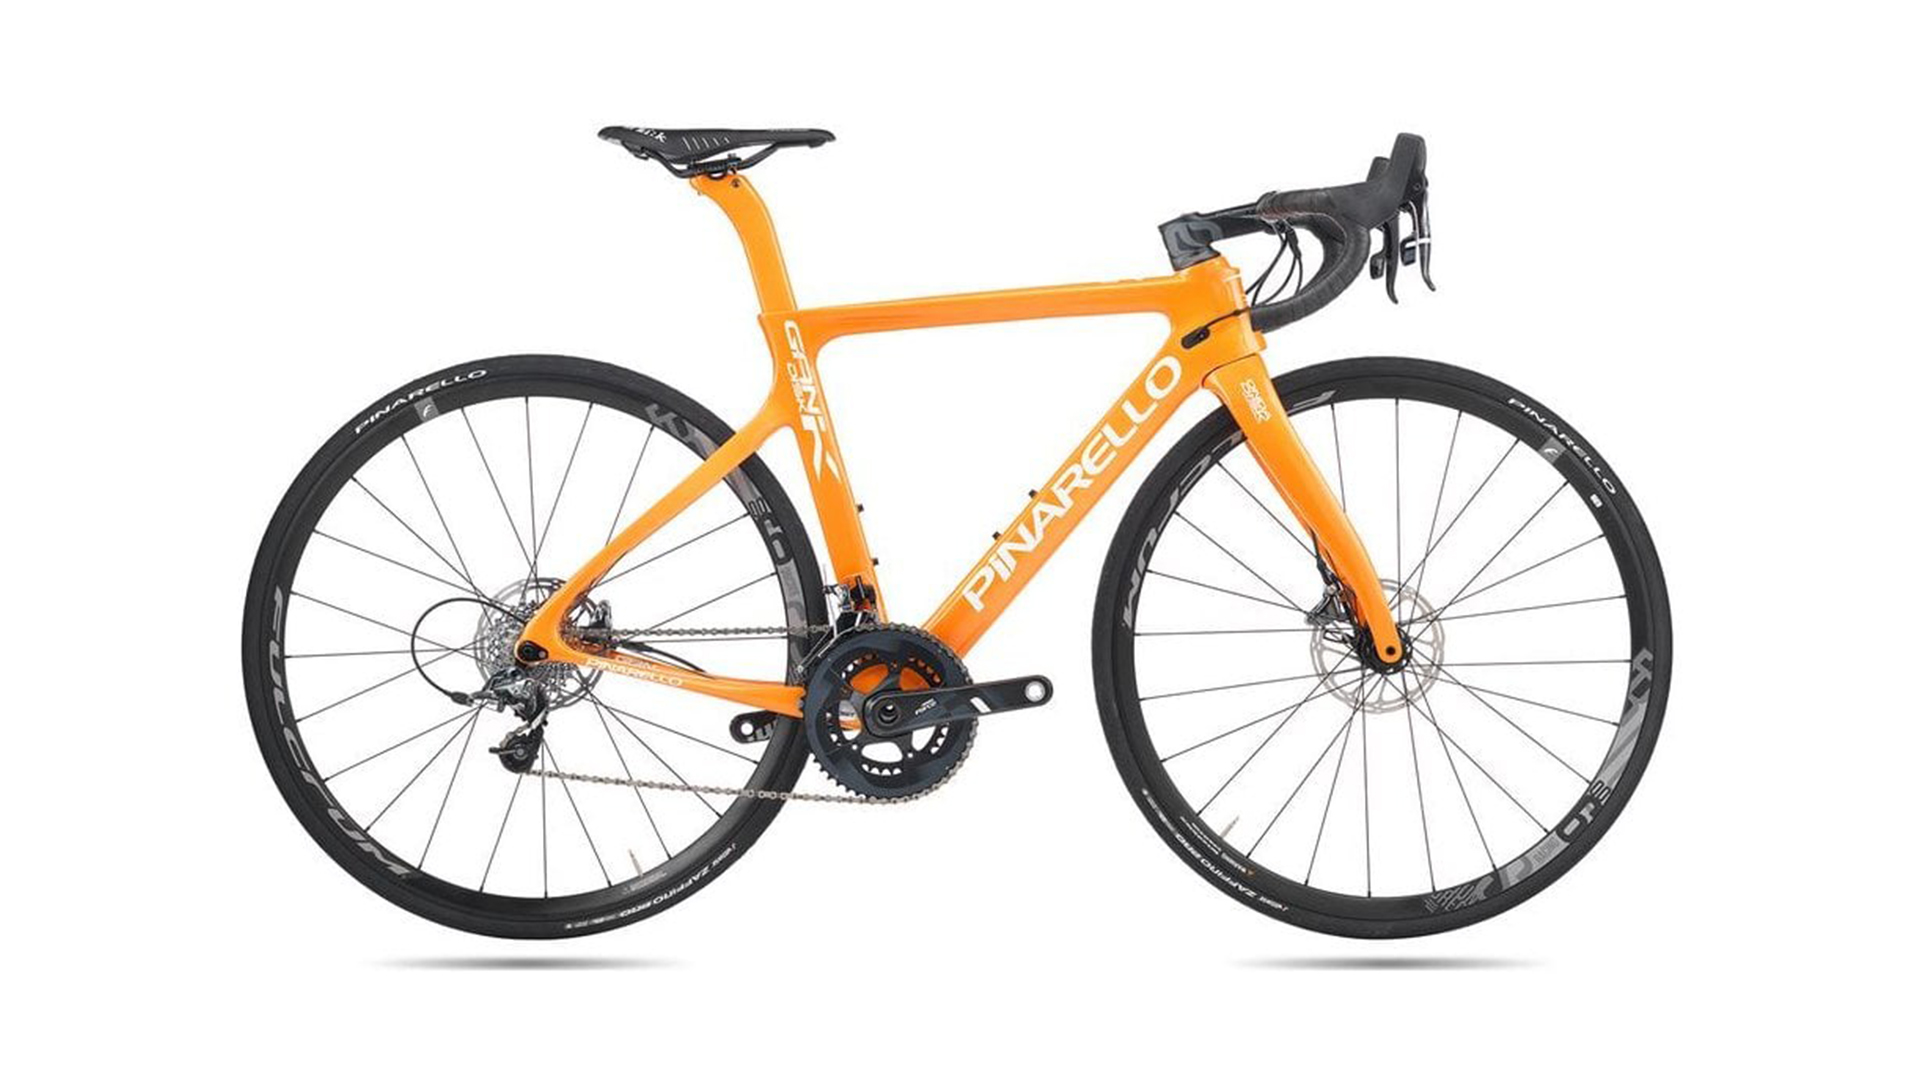 Tour de France team bikes you can actually buy… and alternatives from